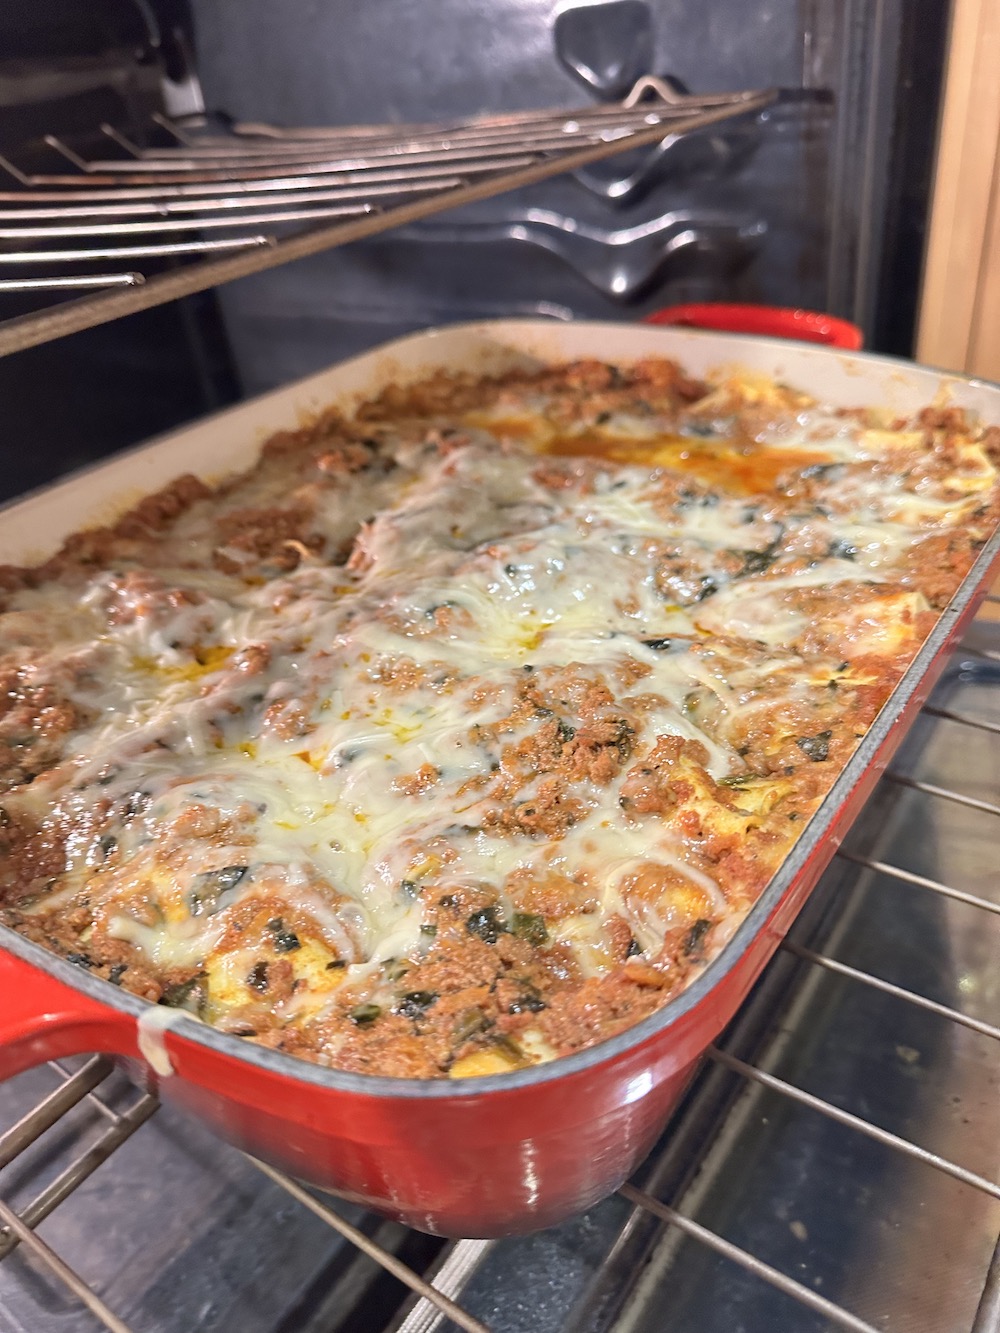 The finished Lasagne all Bolognese